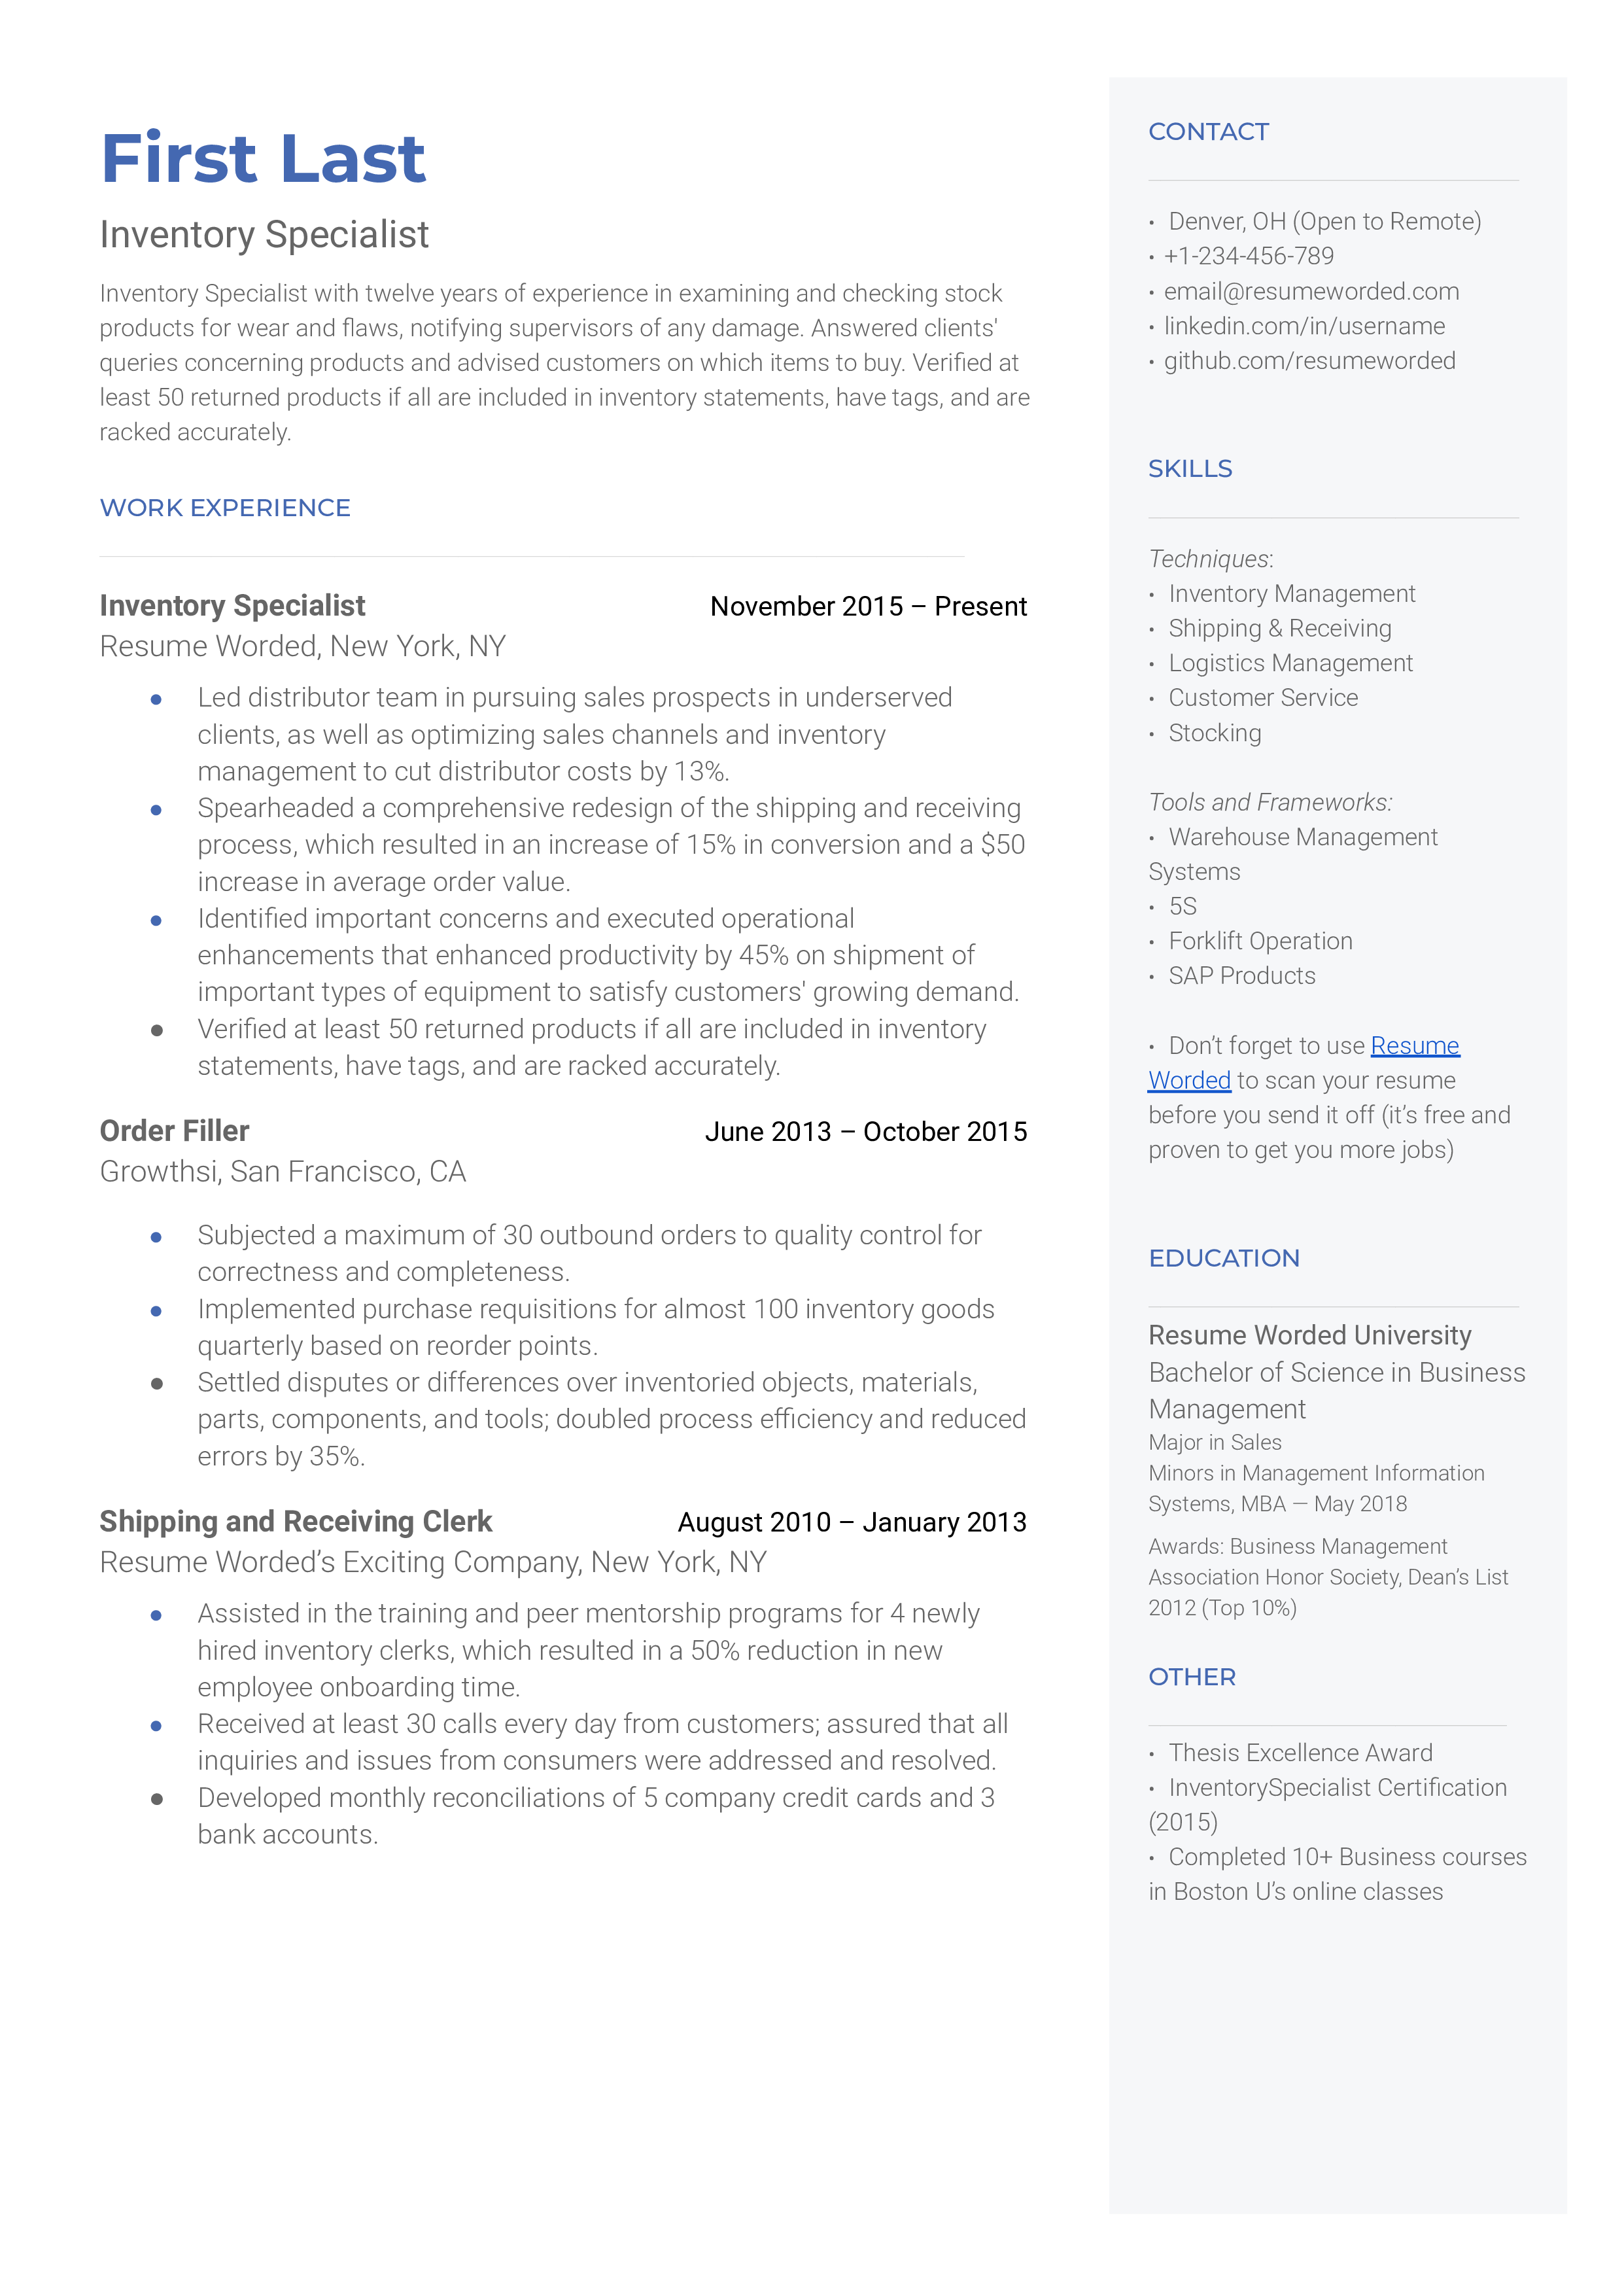 Inventory Specialist Resume Sample